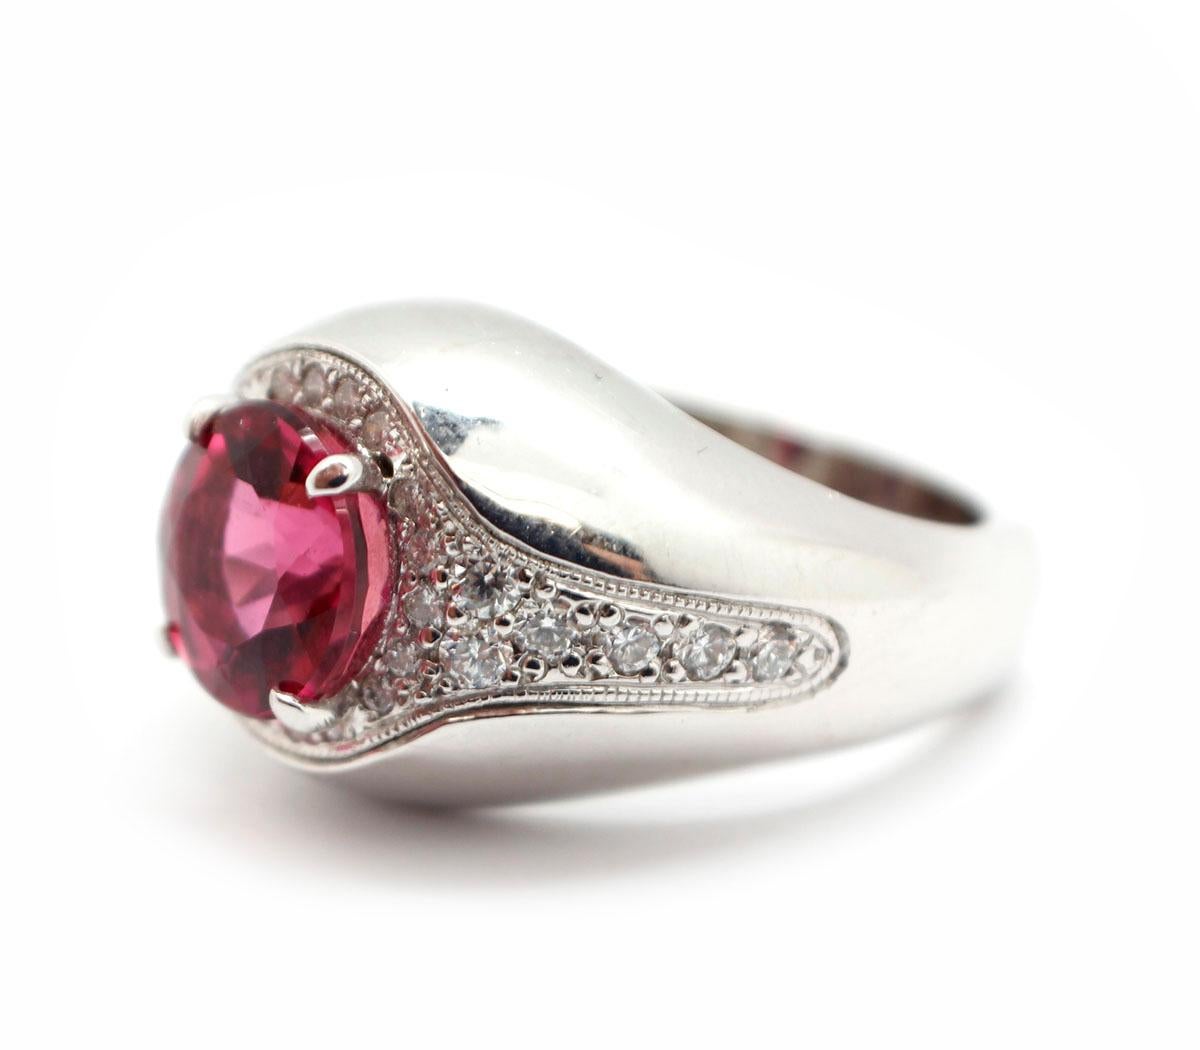 This 14k white gold ring has a beautiful round pink tourmaline at its center. The stone is 3.11 carats, and it measures 9mm in diameter. There are a total of 0.65 carats mounted into the ring around the tourmaline. These stones are G-H in color and